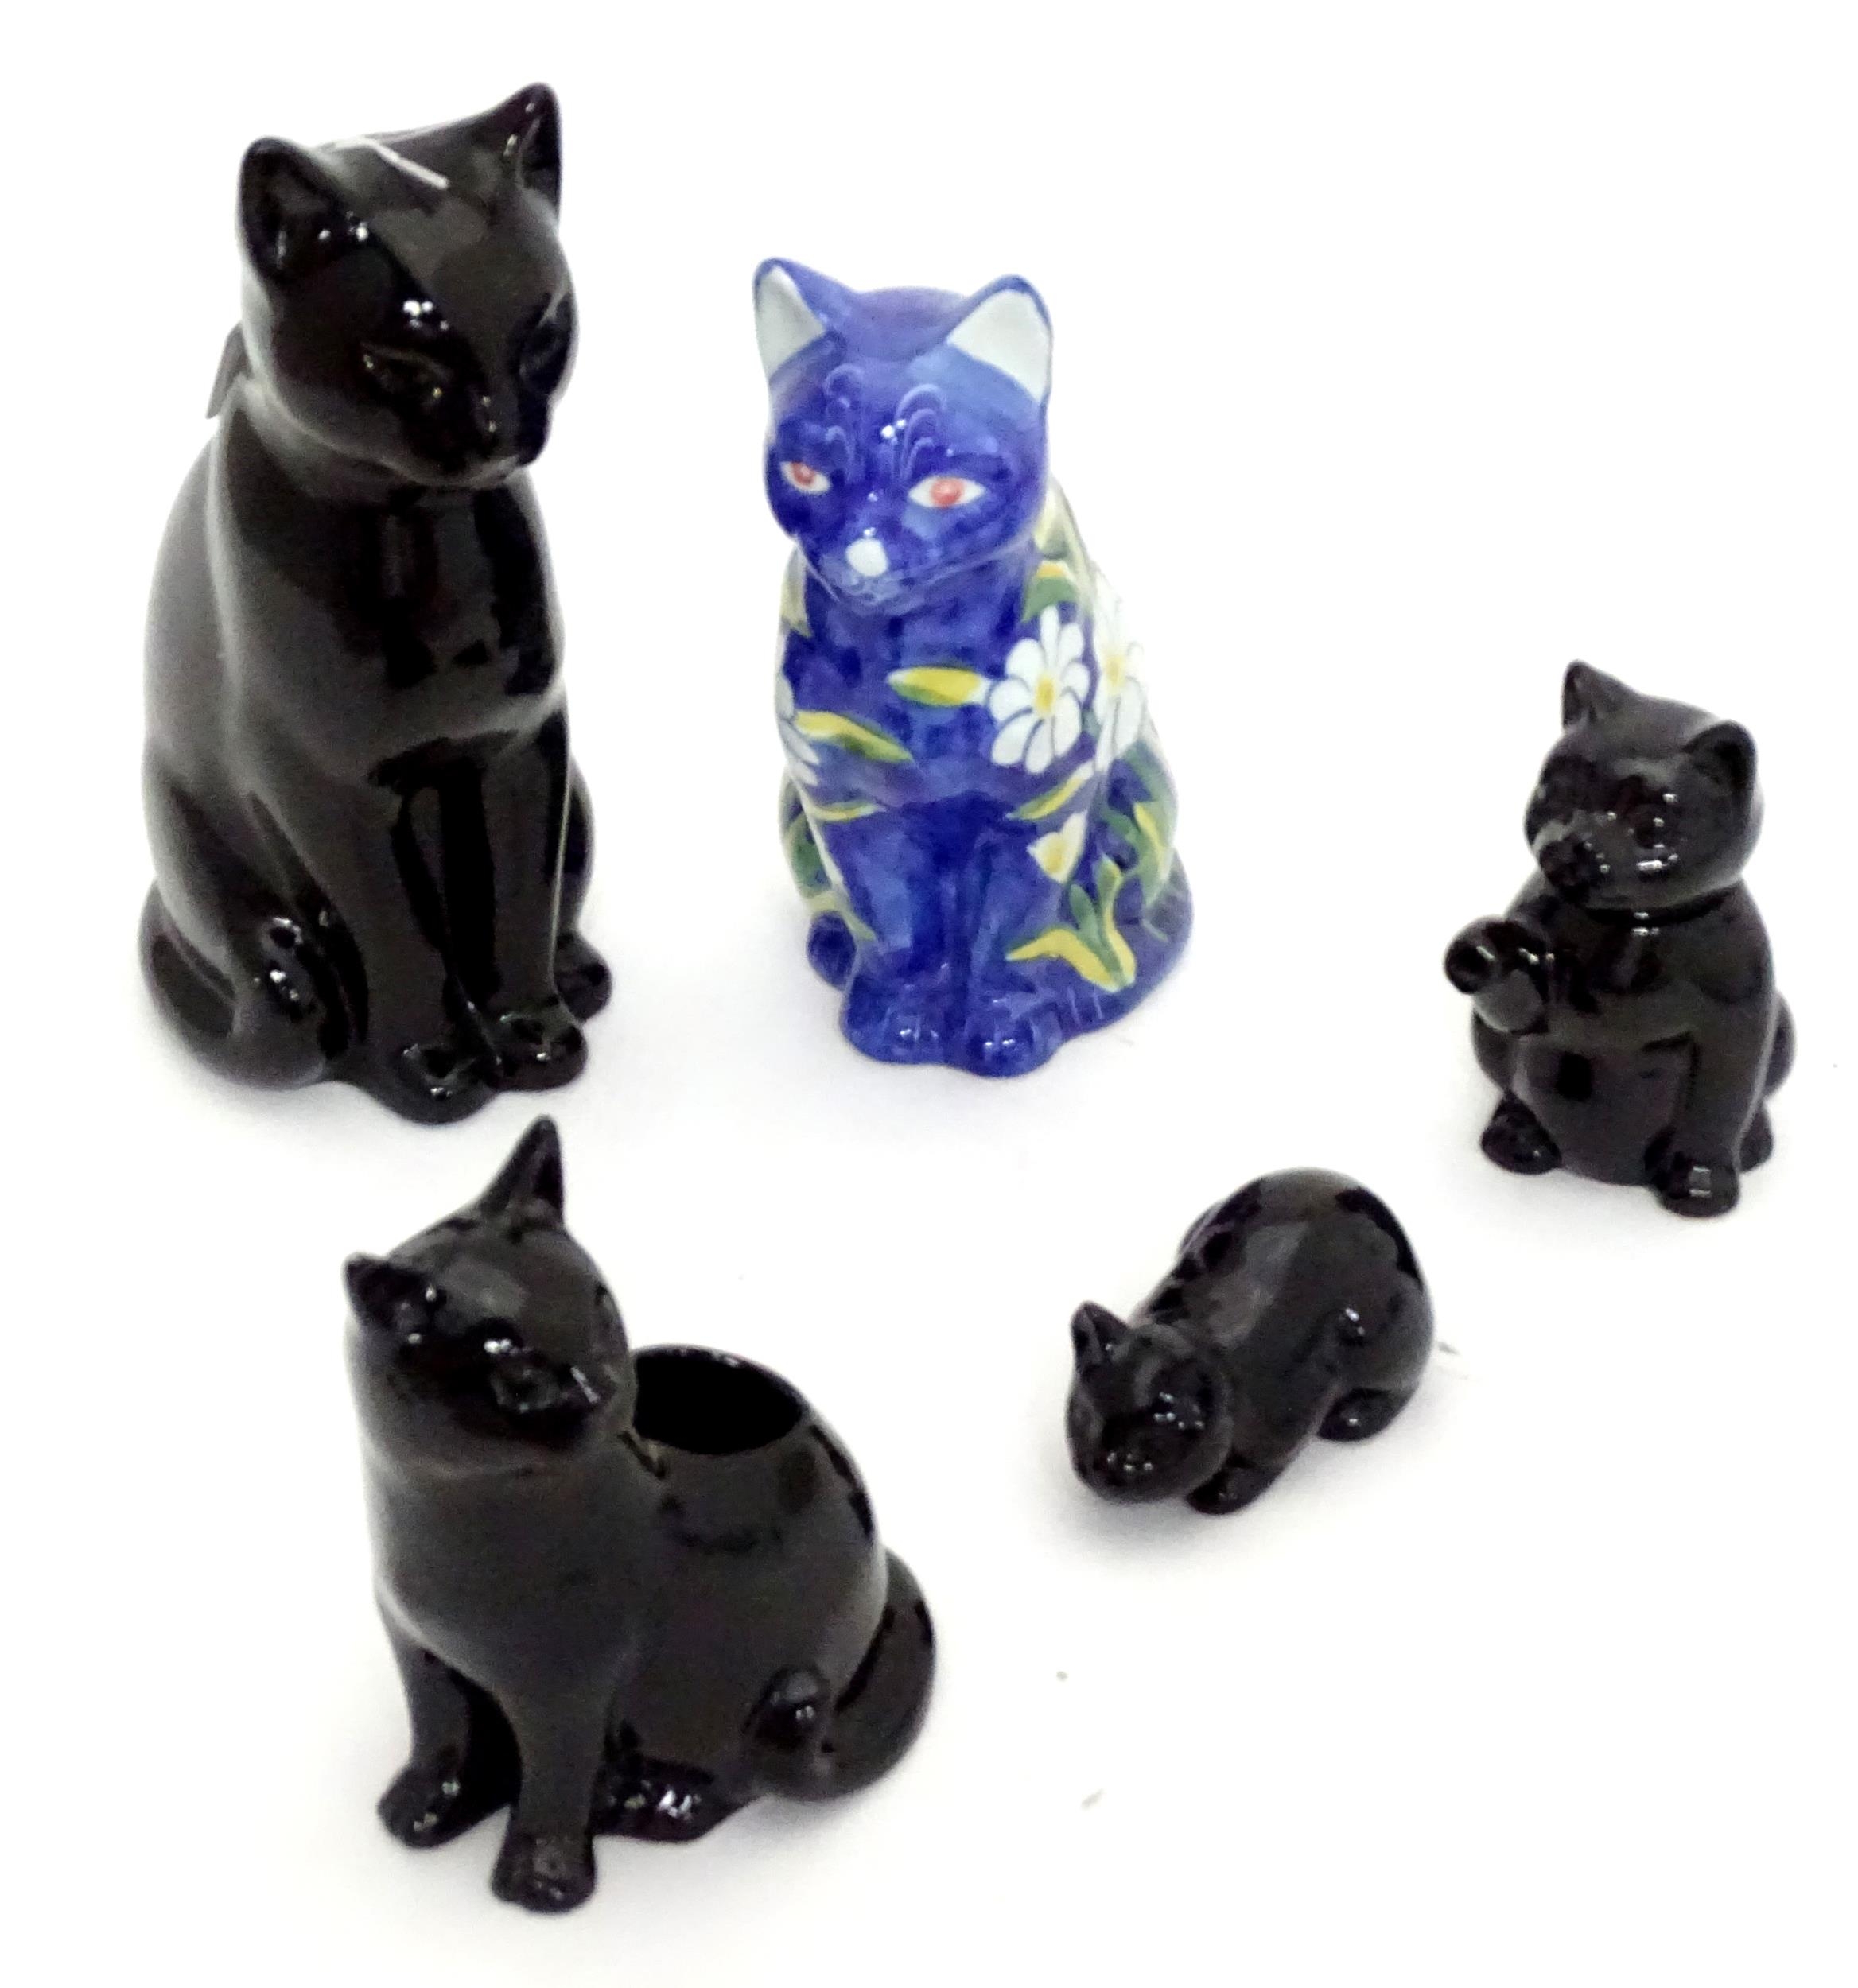 Four ceramic models of cats, together with a small novelty teapot modelled as a black cat. Largest